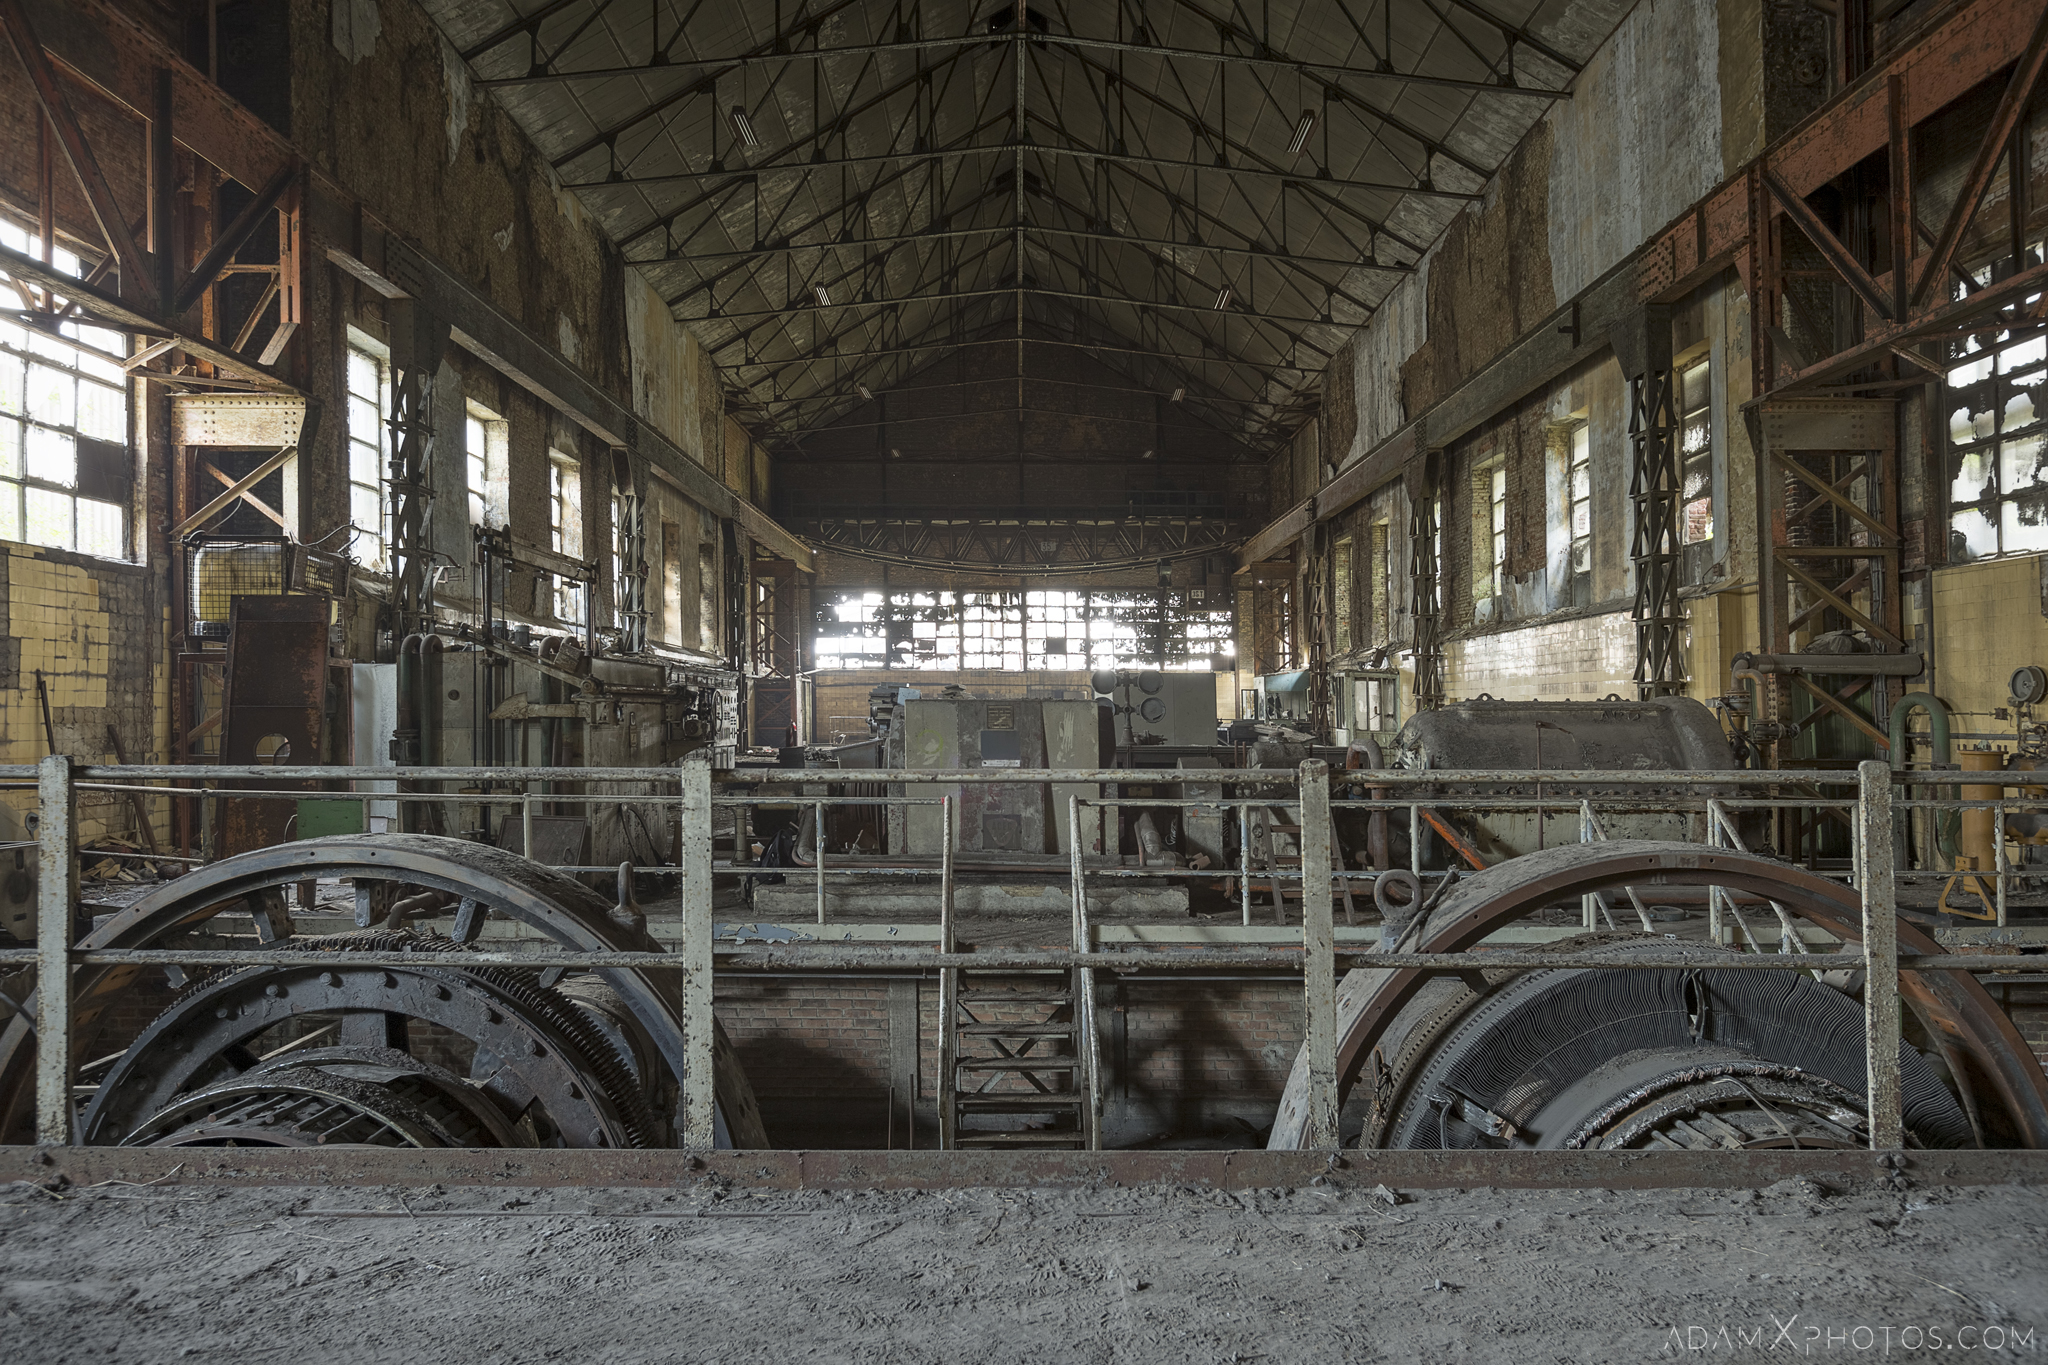 Rotary converters main hall HF4 power plant wet dogs AMEC Industrial Industry Adam X Urban Exploration Belgium Access 2017 Abandoned decay lost forgotten derelict location creepy haunting eerie